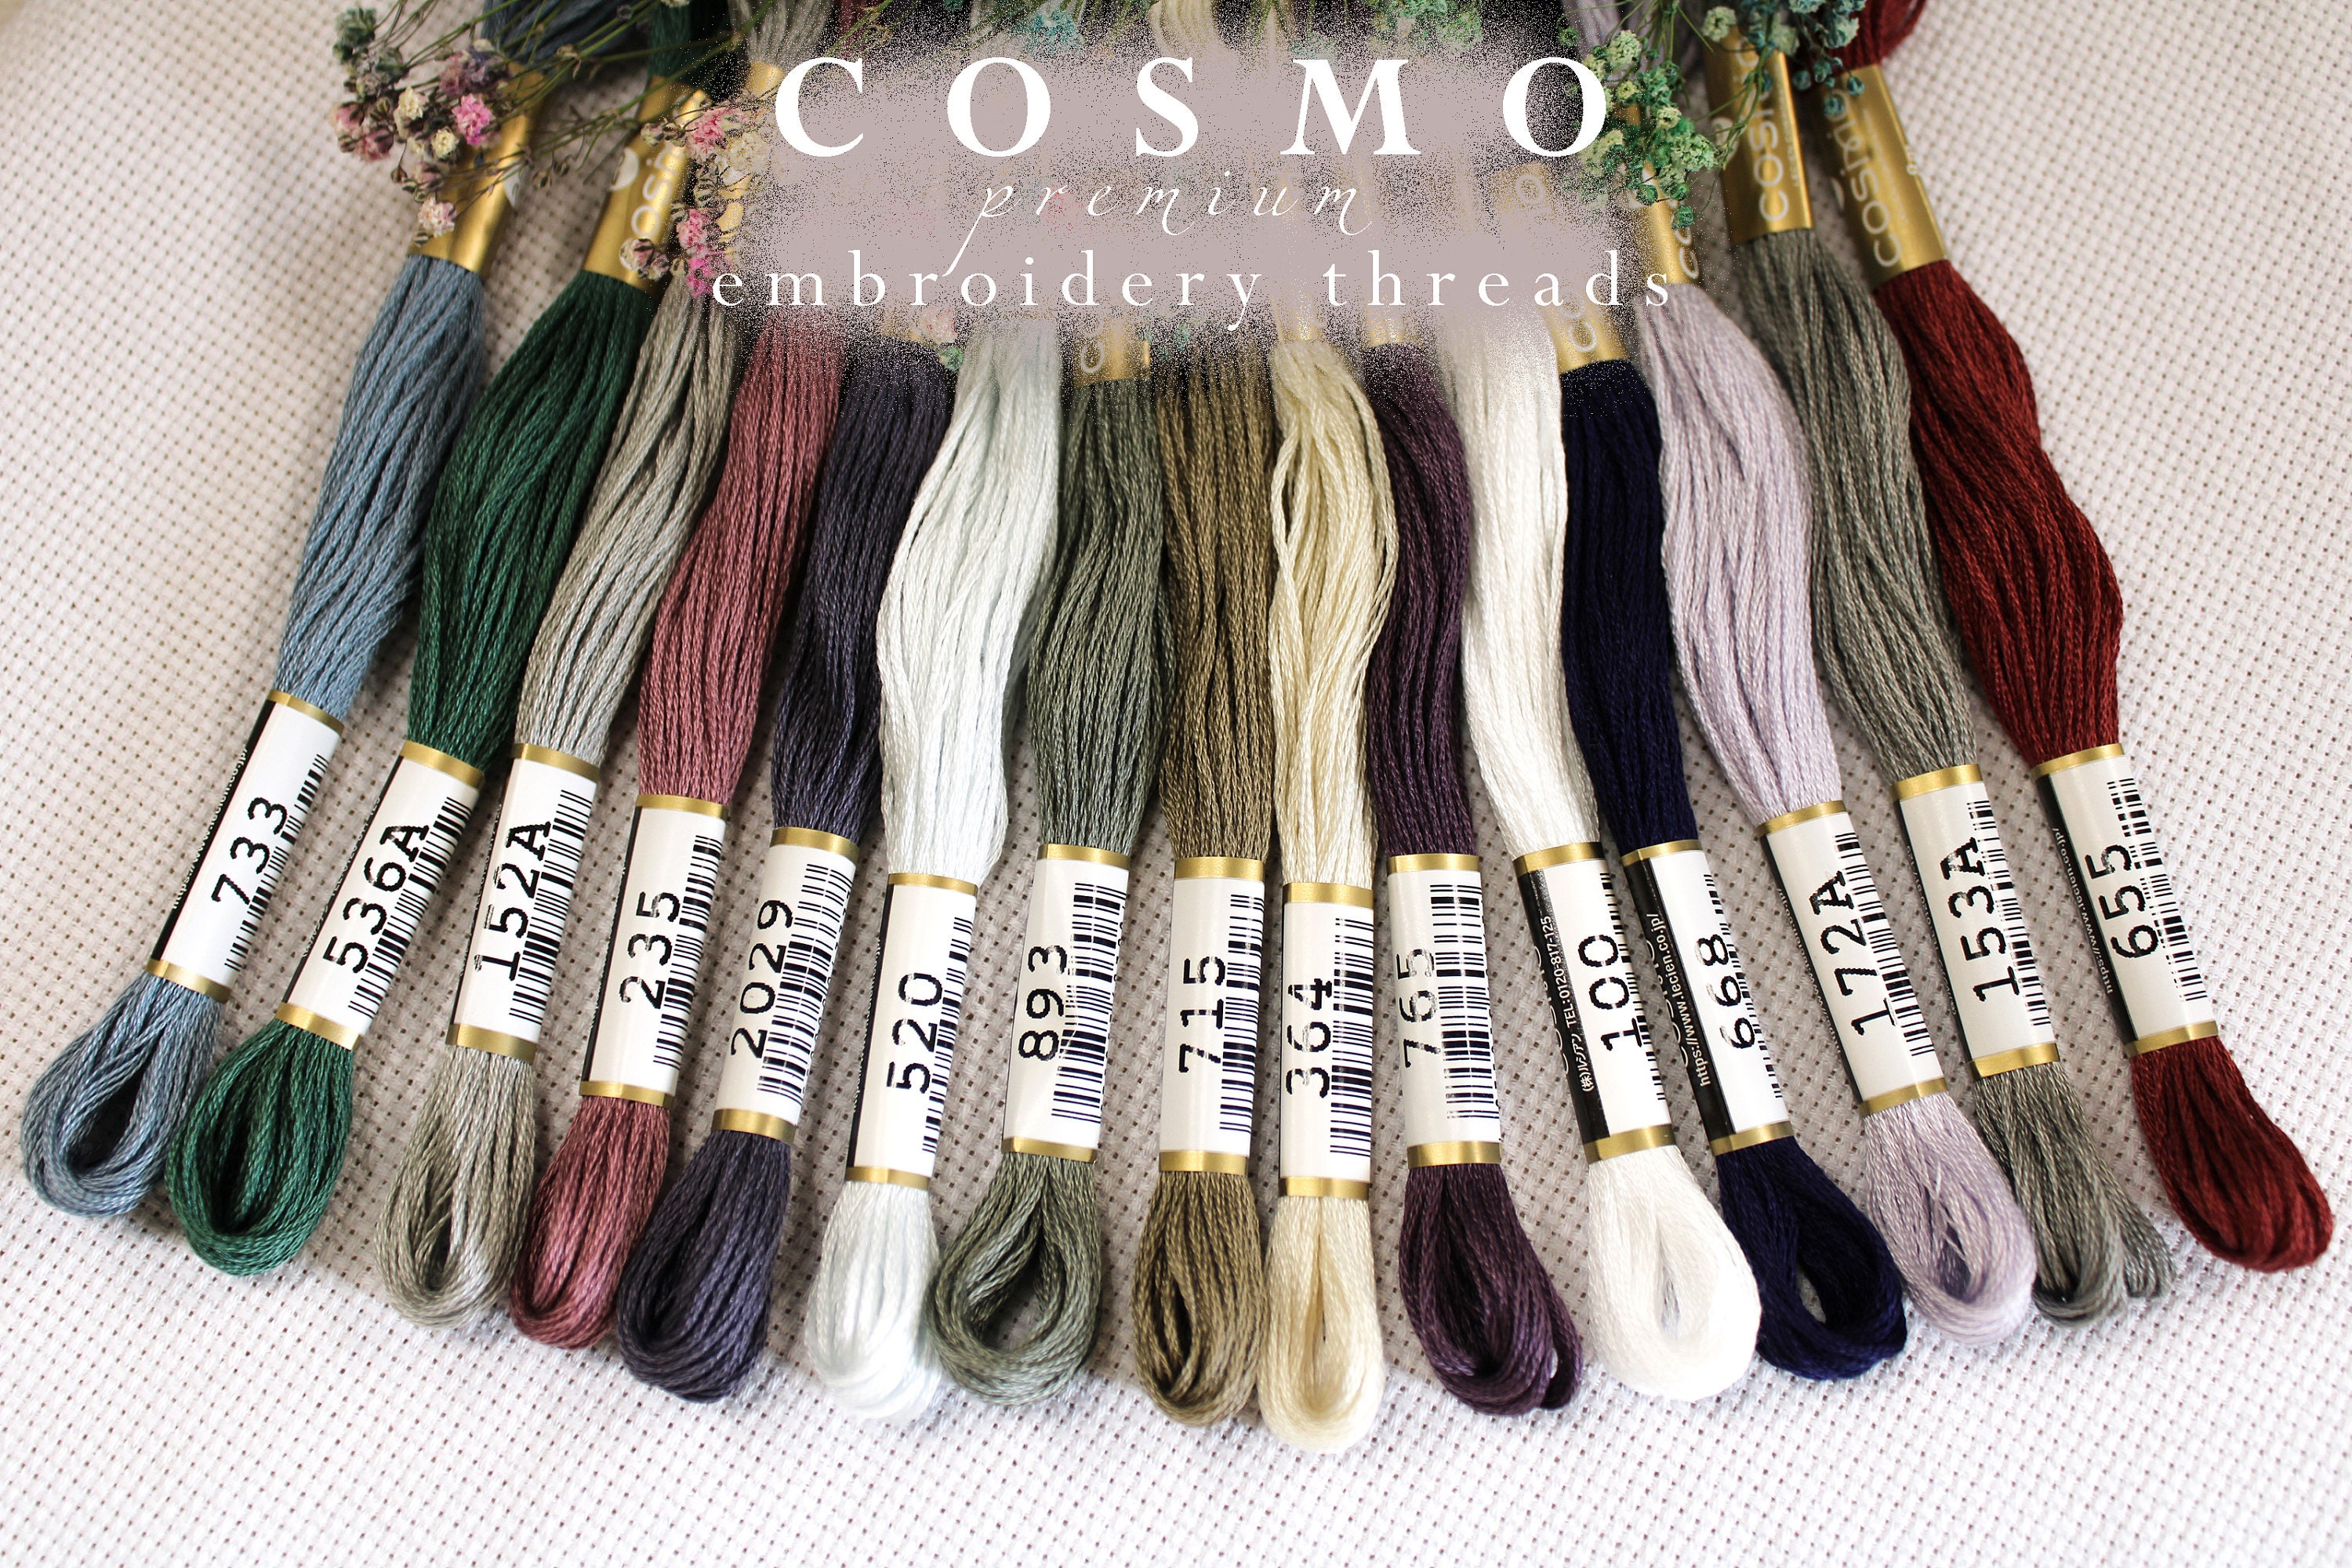 dmc embroidery floss all colors